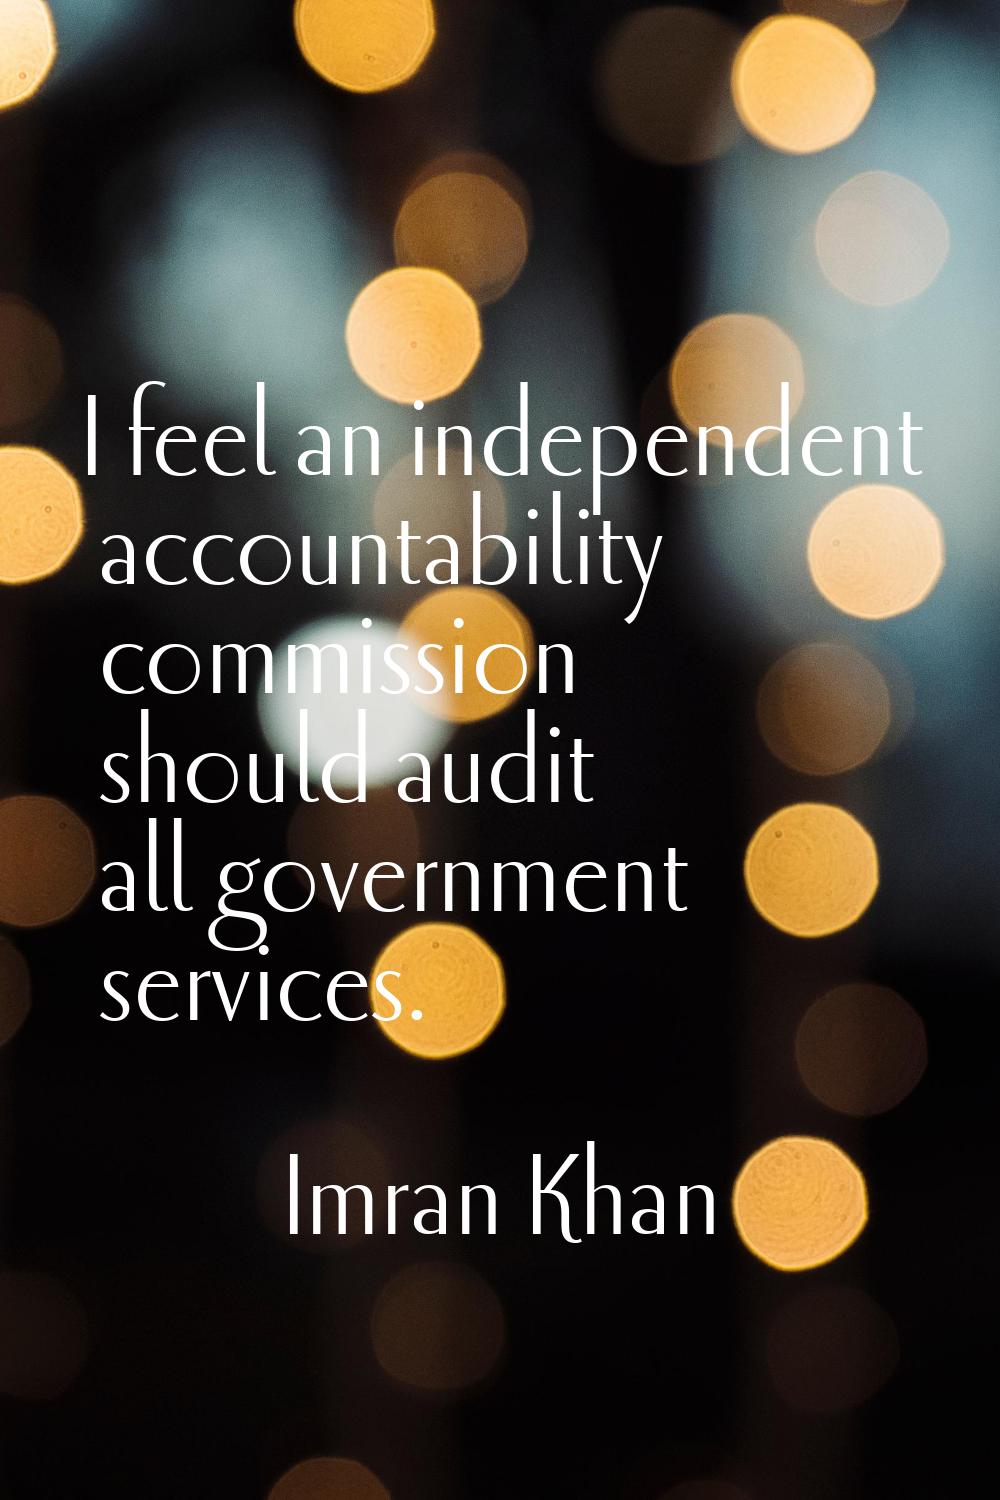 I feel an independent accountability commission should audit all government services.